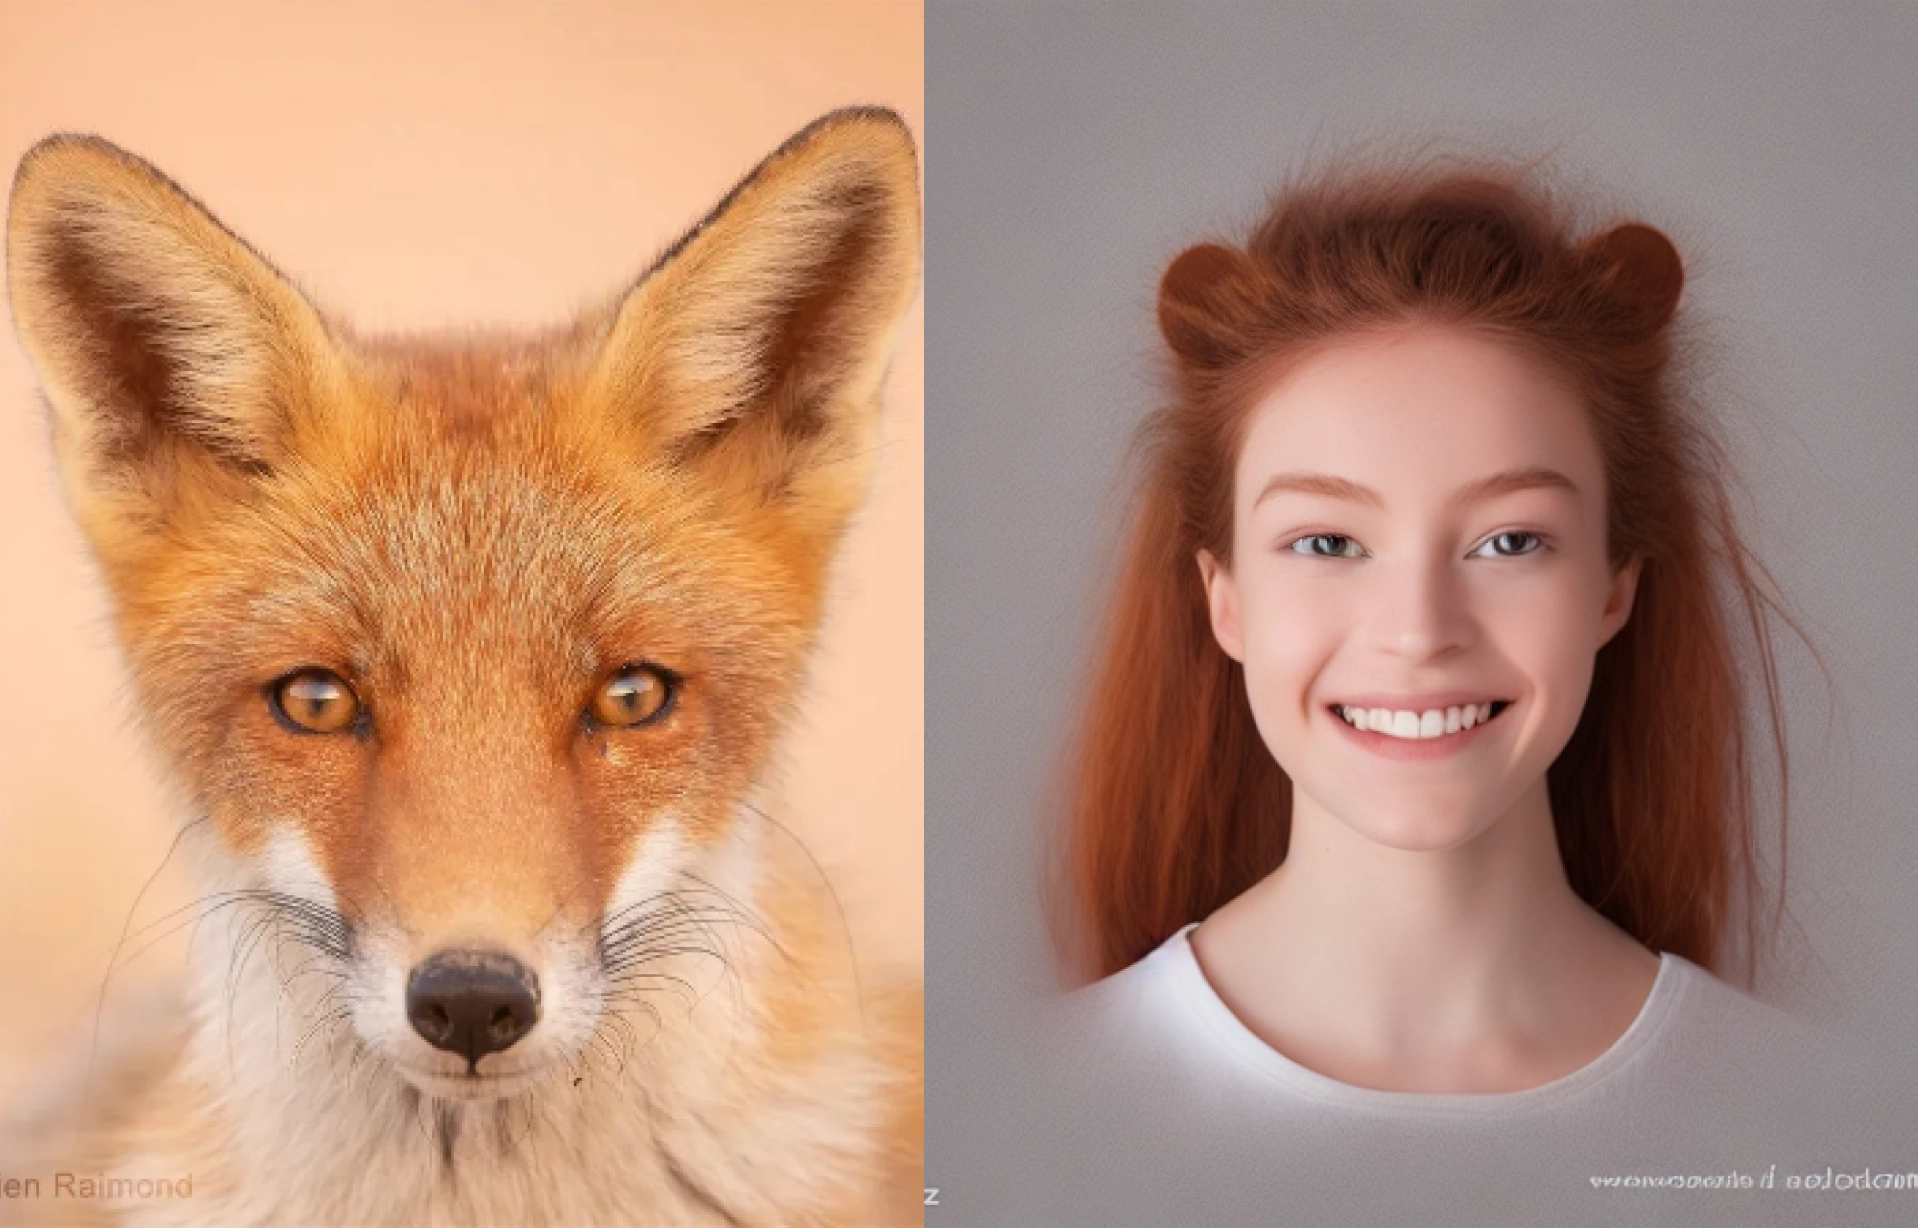 Combine Your Face with Any Animal You Like